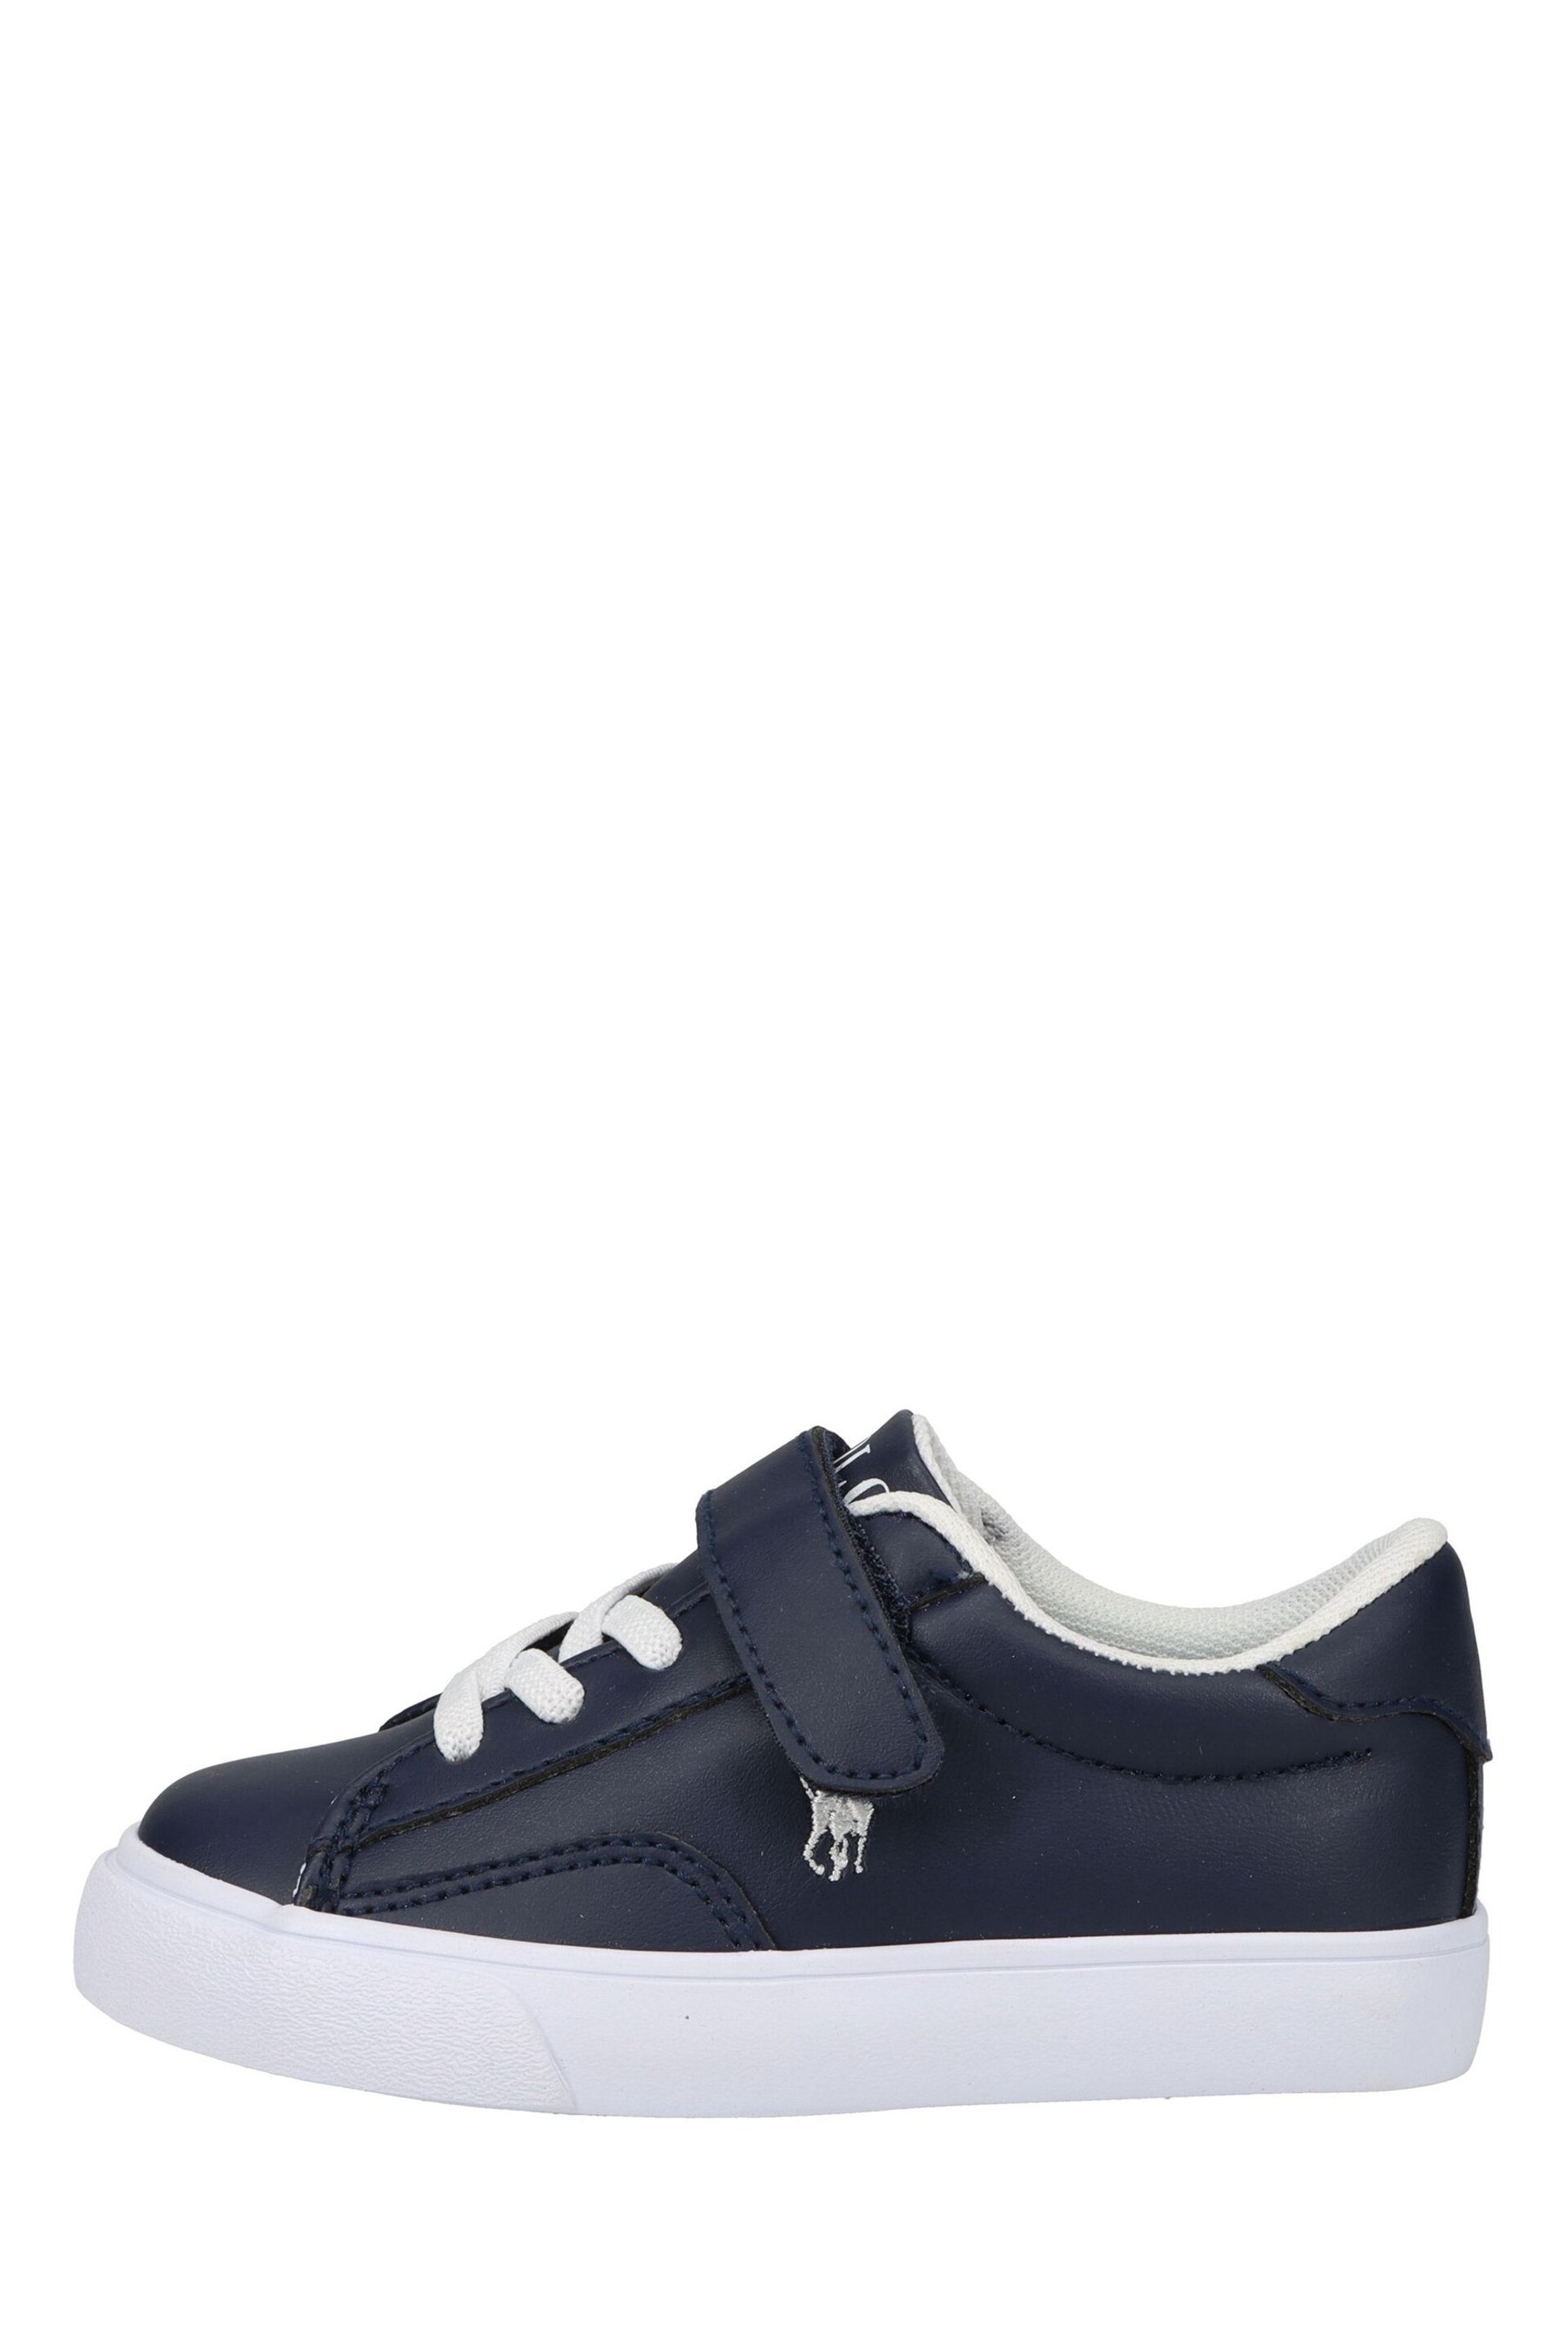 Polo Ralph Lauren Theron V Velcro Logo Trainers - Image 1 of 5